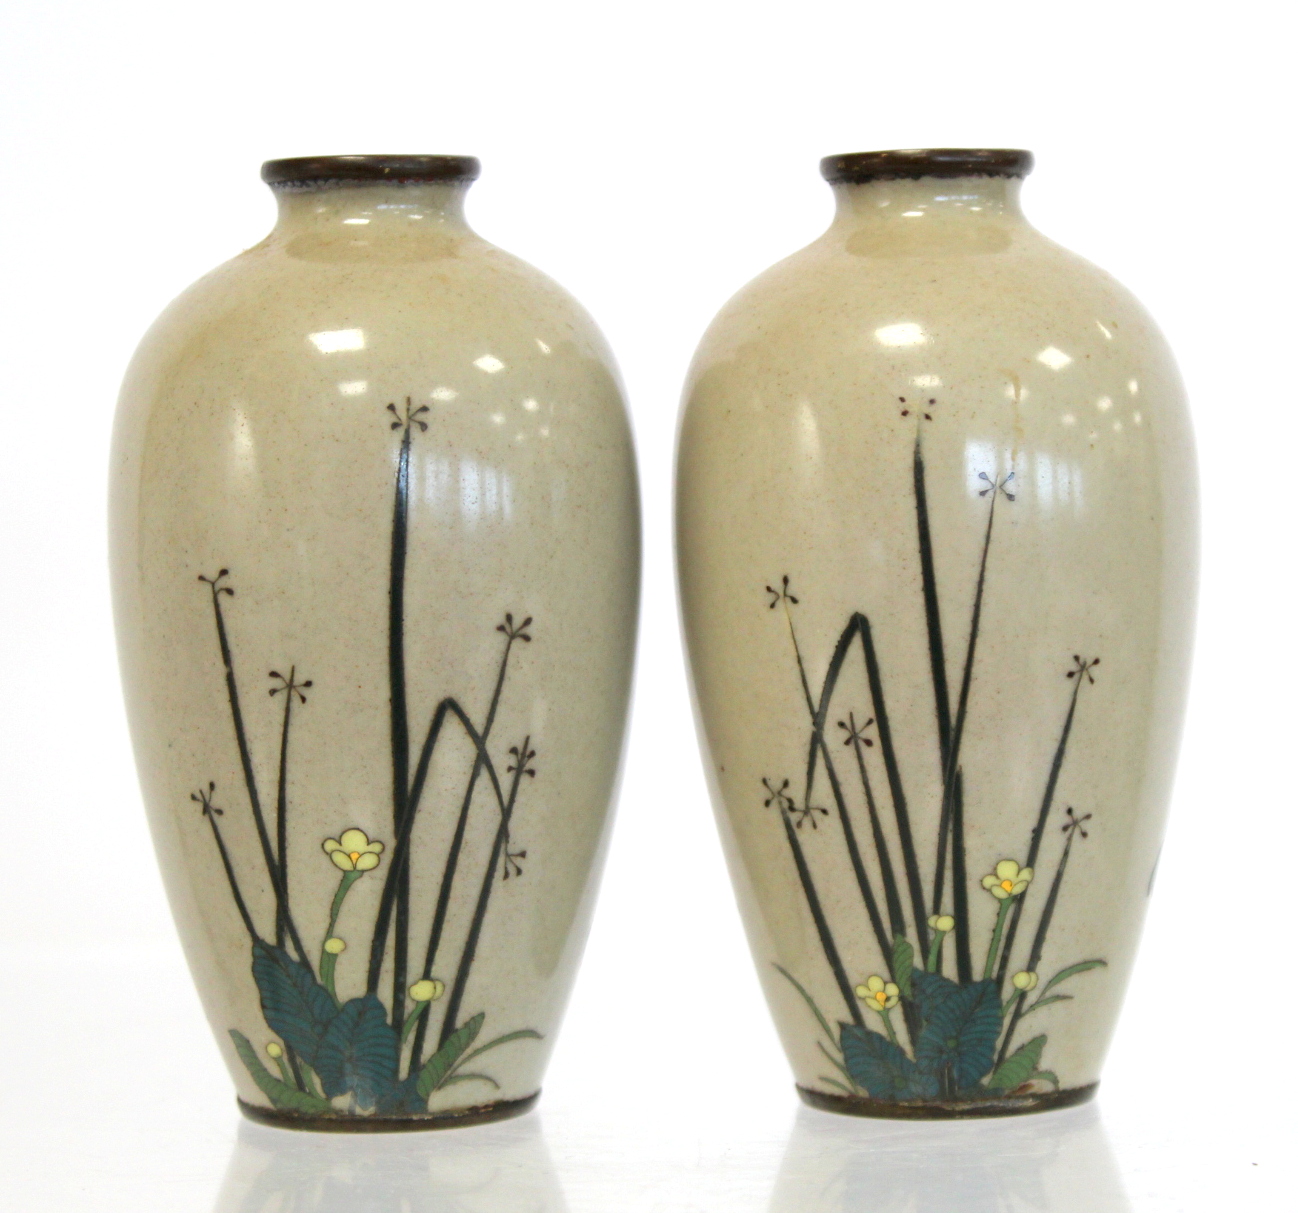 Pair of small Japanese Meiji period cloisonné vases with polychrome enamel decoration highlighted - Image 4 of 20